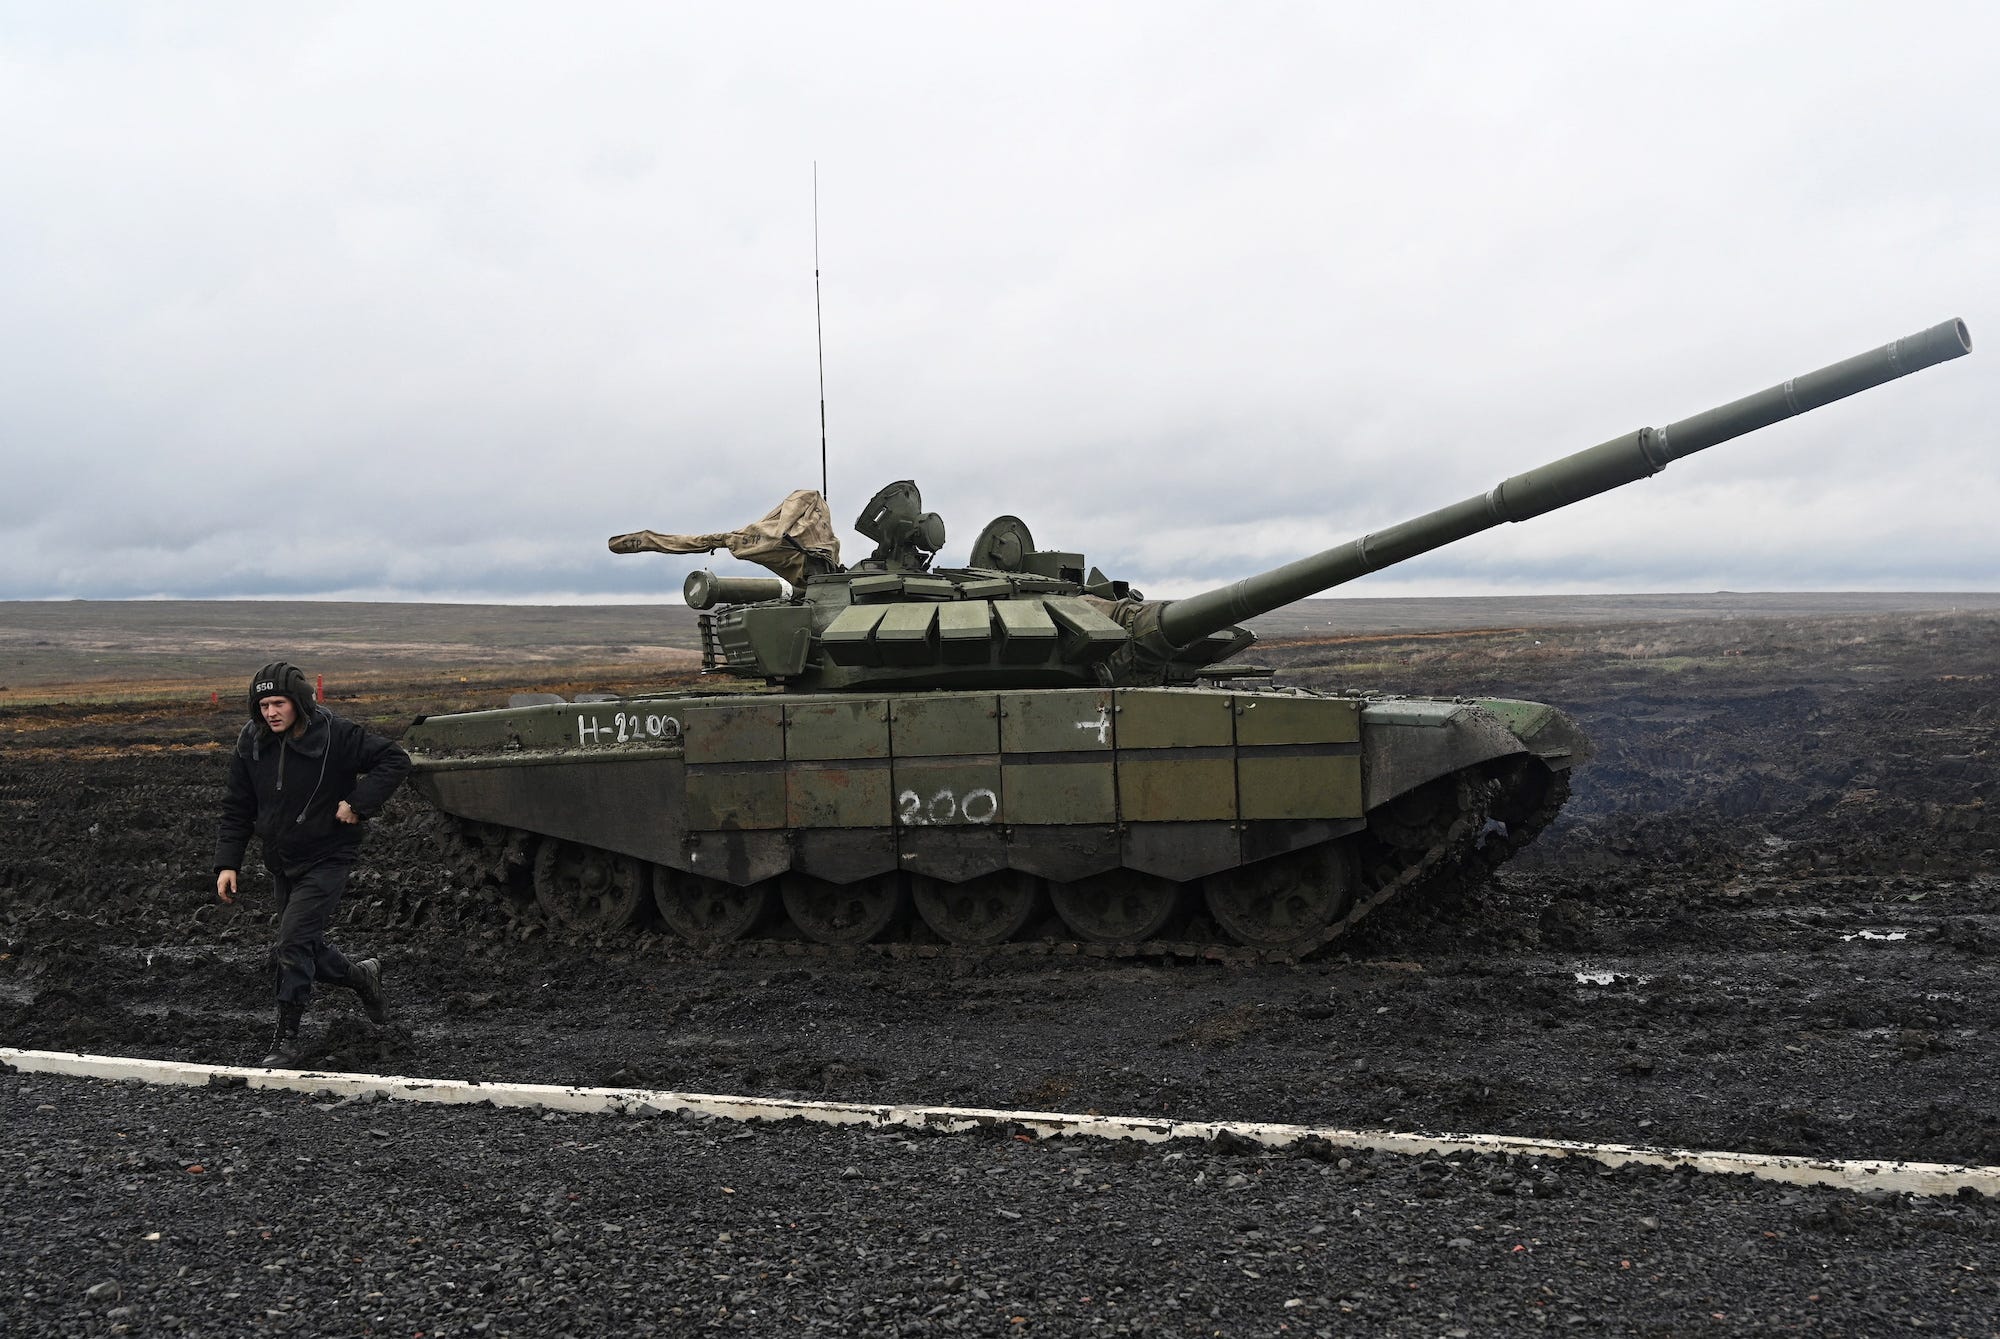 A Russian tank and Russian soldier